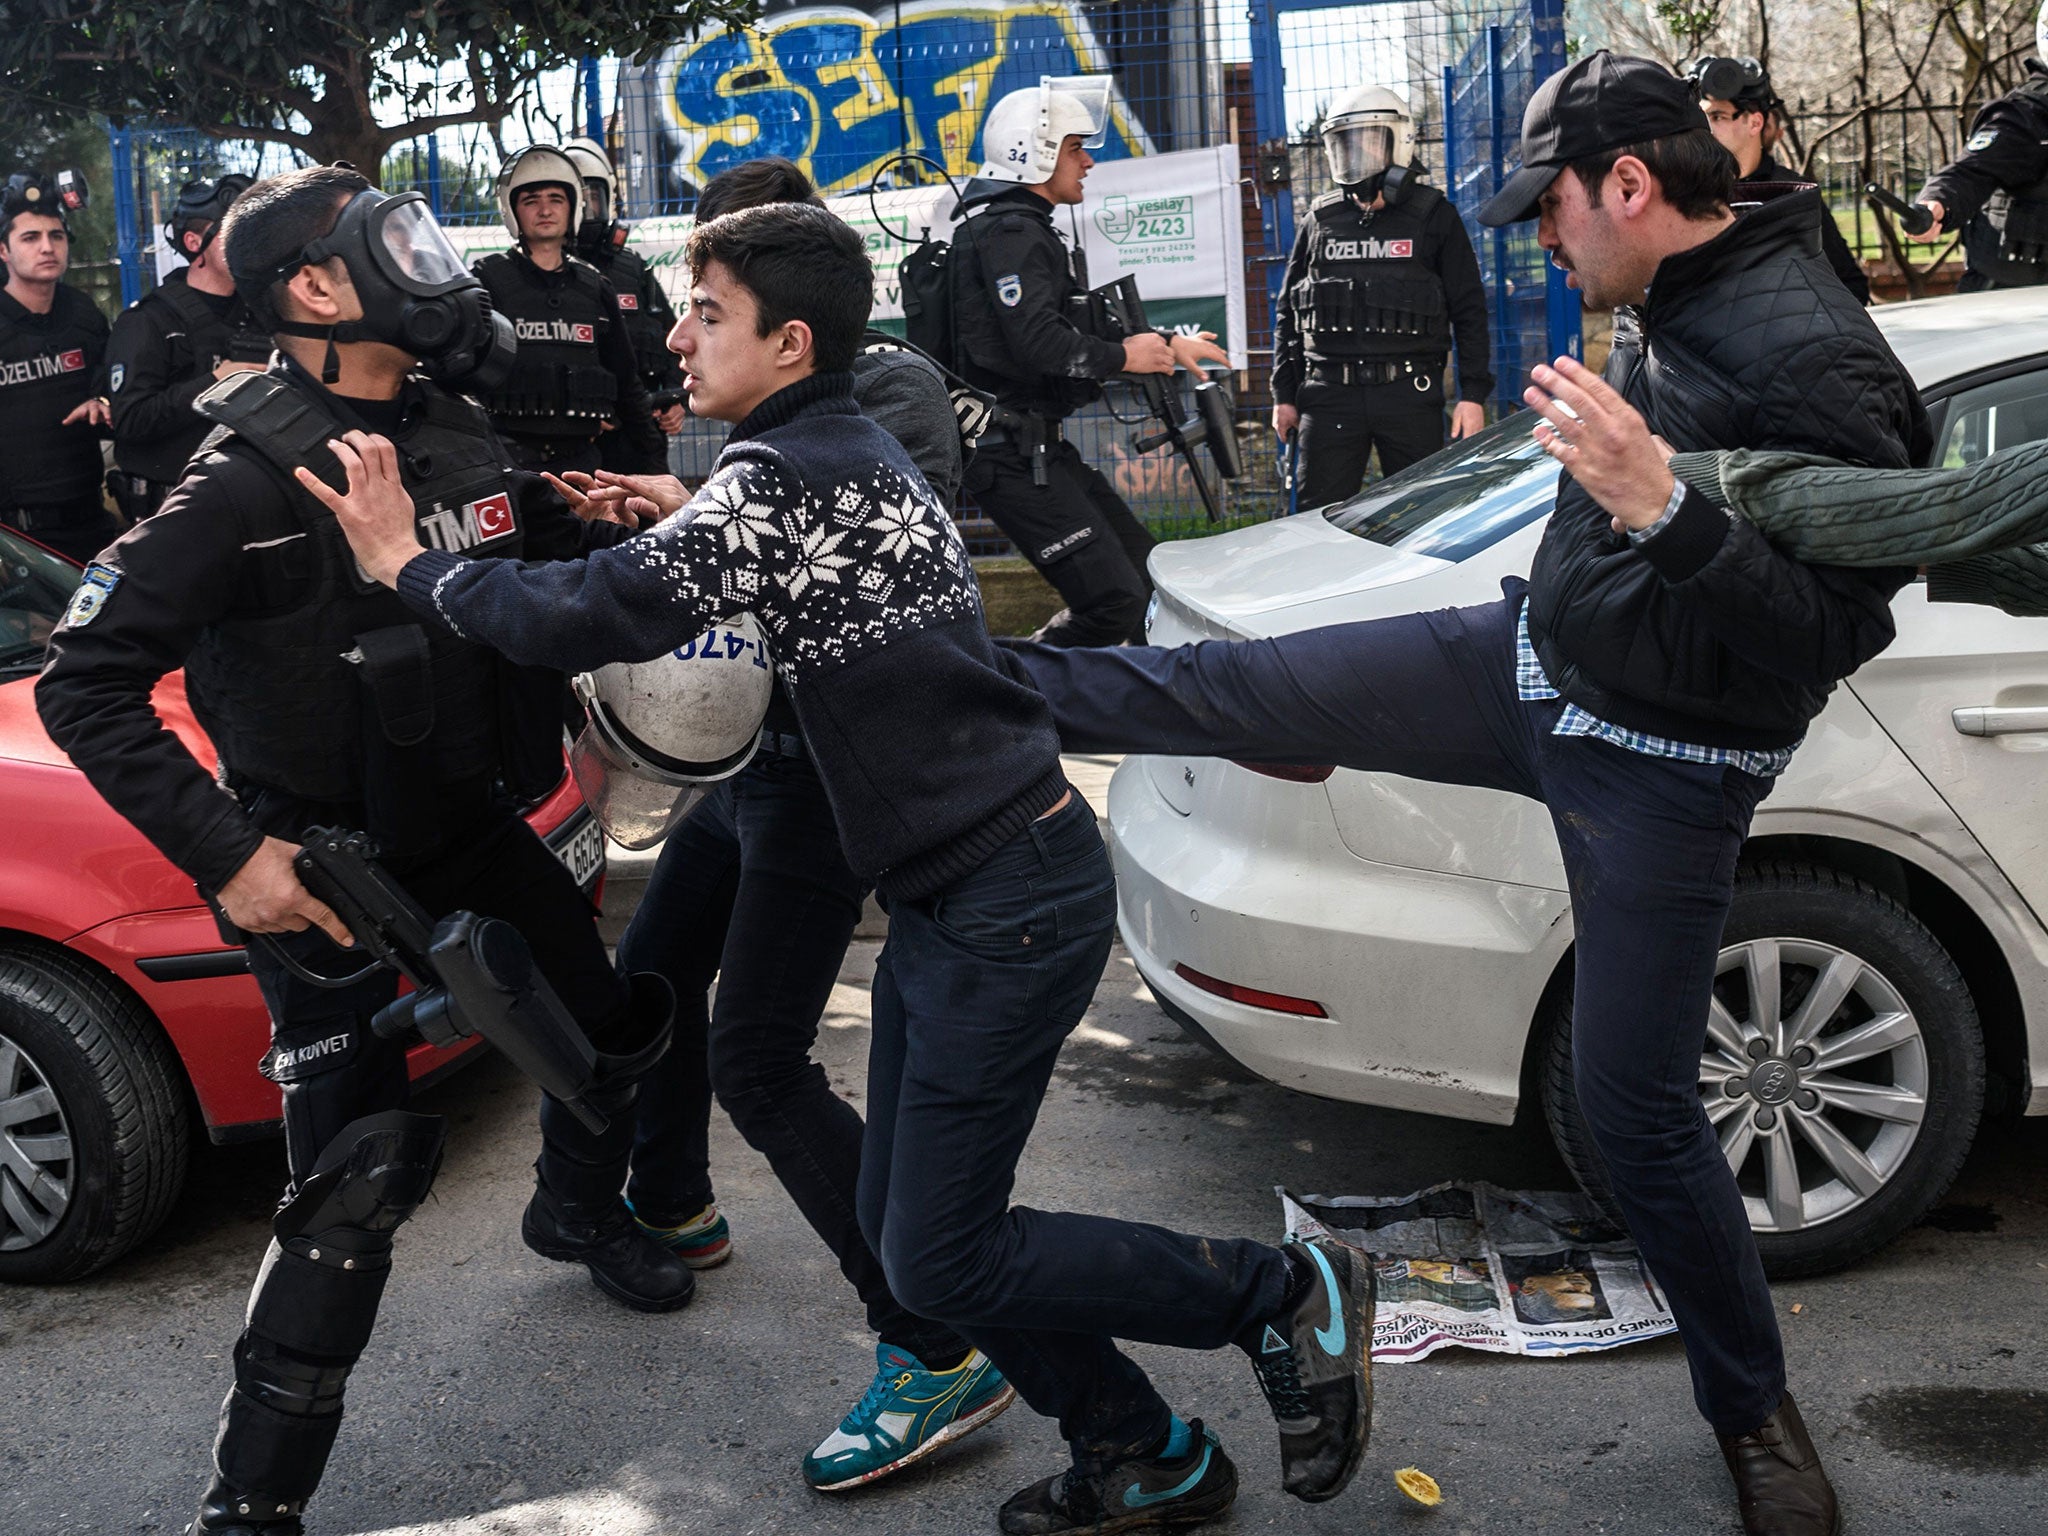 A plainclothes police officer kicks a demonstrator as Turkish anti-riot police officers disperse supporters in front of the headquarters of the Turkish daily newspaper Zaman in Istanbul on March 5, 2016